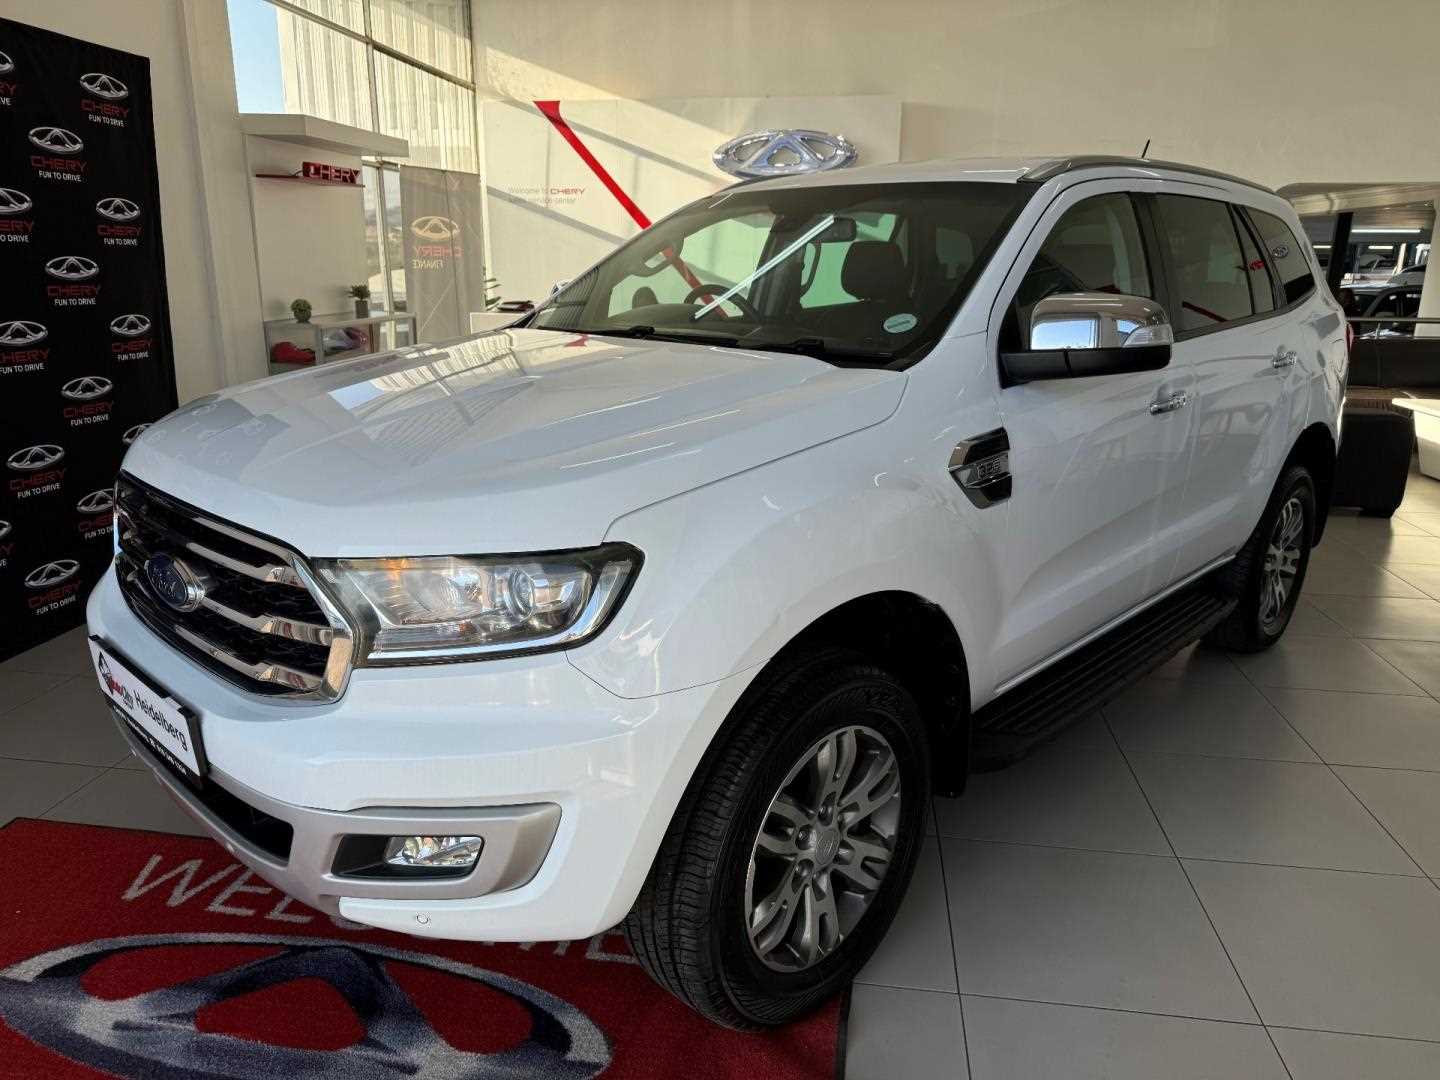 2020 Ford Everest MY20.75 3.2 Tdci Xlt 4X4 At for sale - 338032